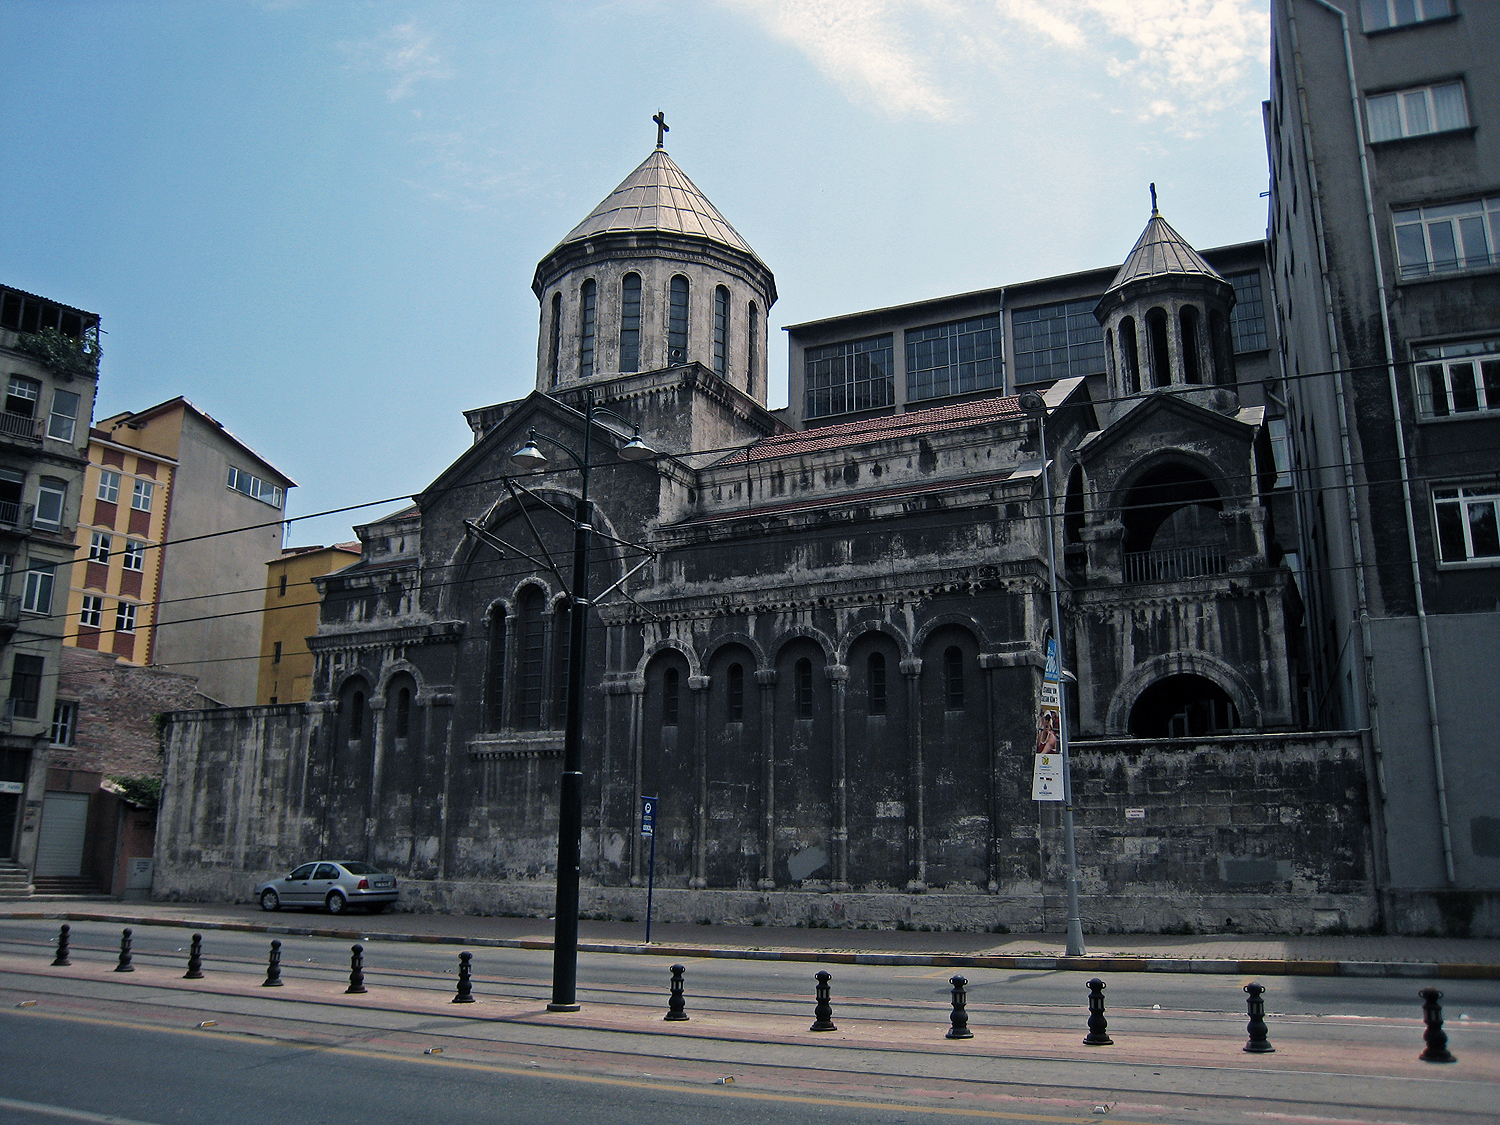 The Getronagan Varjaran, or Central High School, established in 1886, next to the St. Gregory the Illuminator church, on a main thoroughfare in Istanbul; many illustrious names are associated with this school, within the walls of which is a piano once played by none other than Gomidas (Komitas)